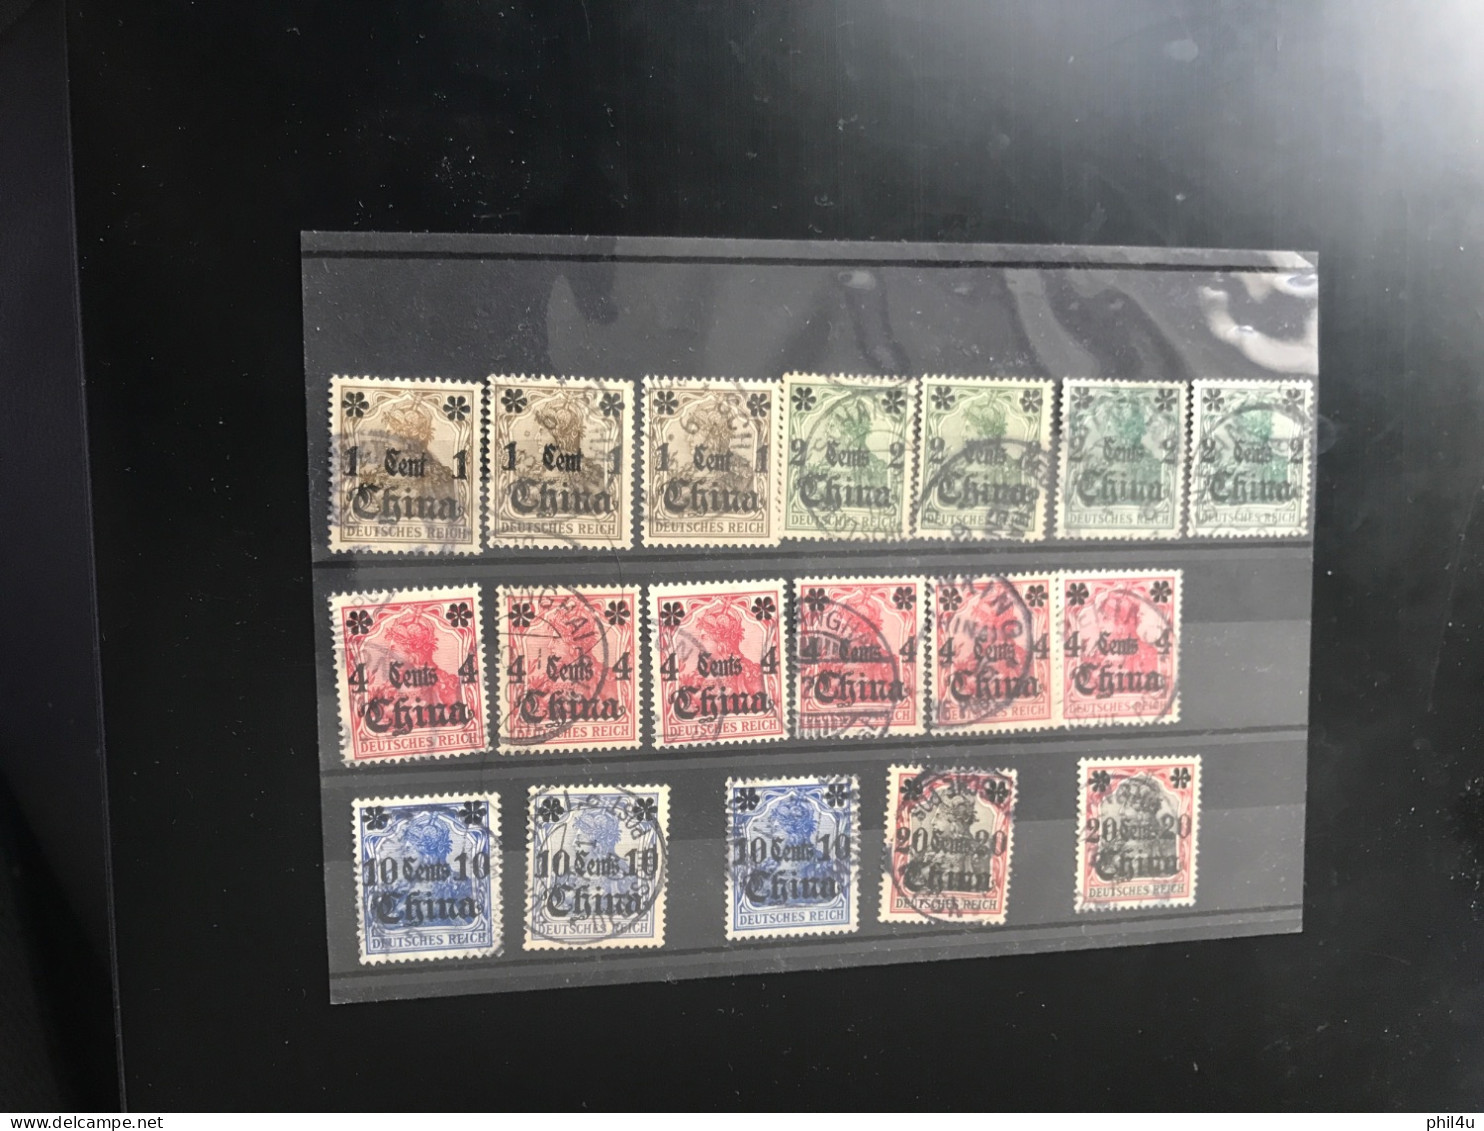 China Overprinted On Deutsch Reich SG1c,2c,4c,10c,20c Cat £66.75 As Per SG2018 £66.75 See Photos - Usados